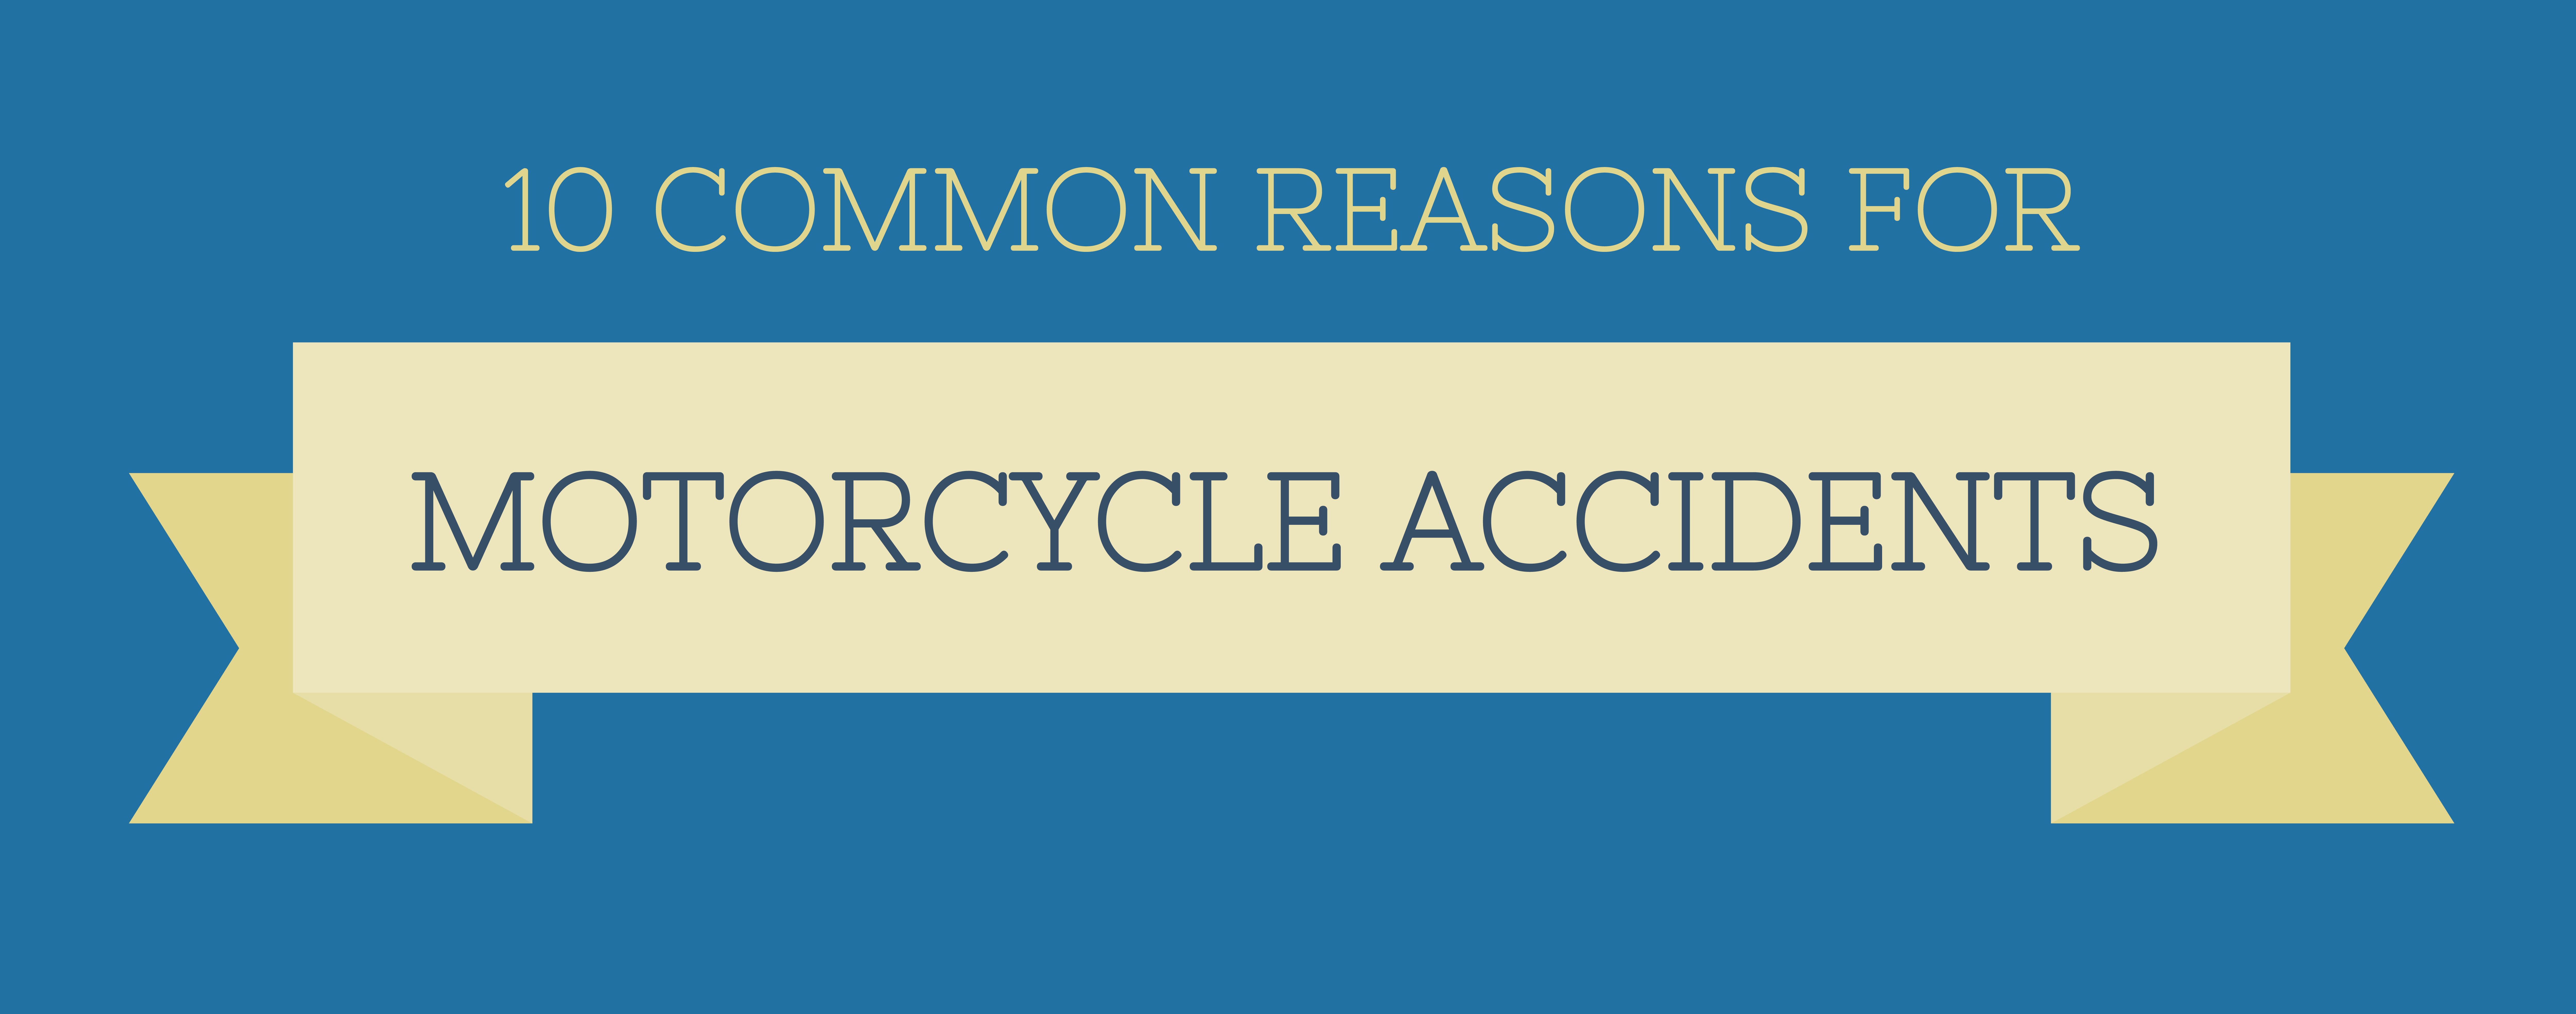 common reasons for motorcycle accidents infographic header